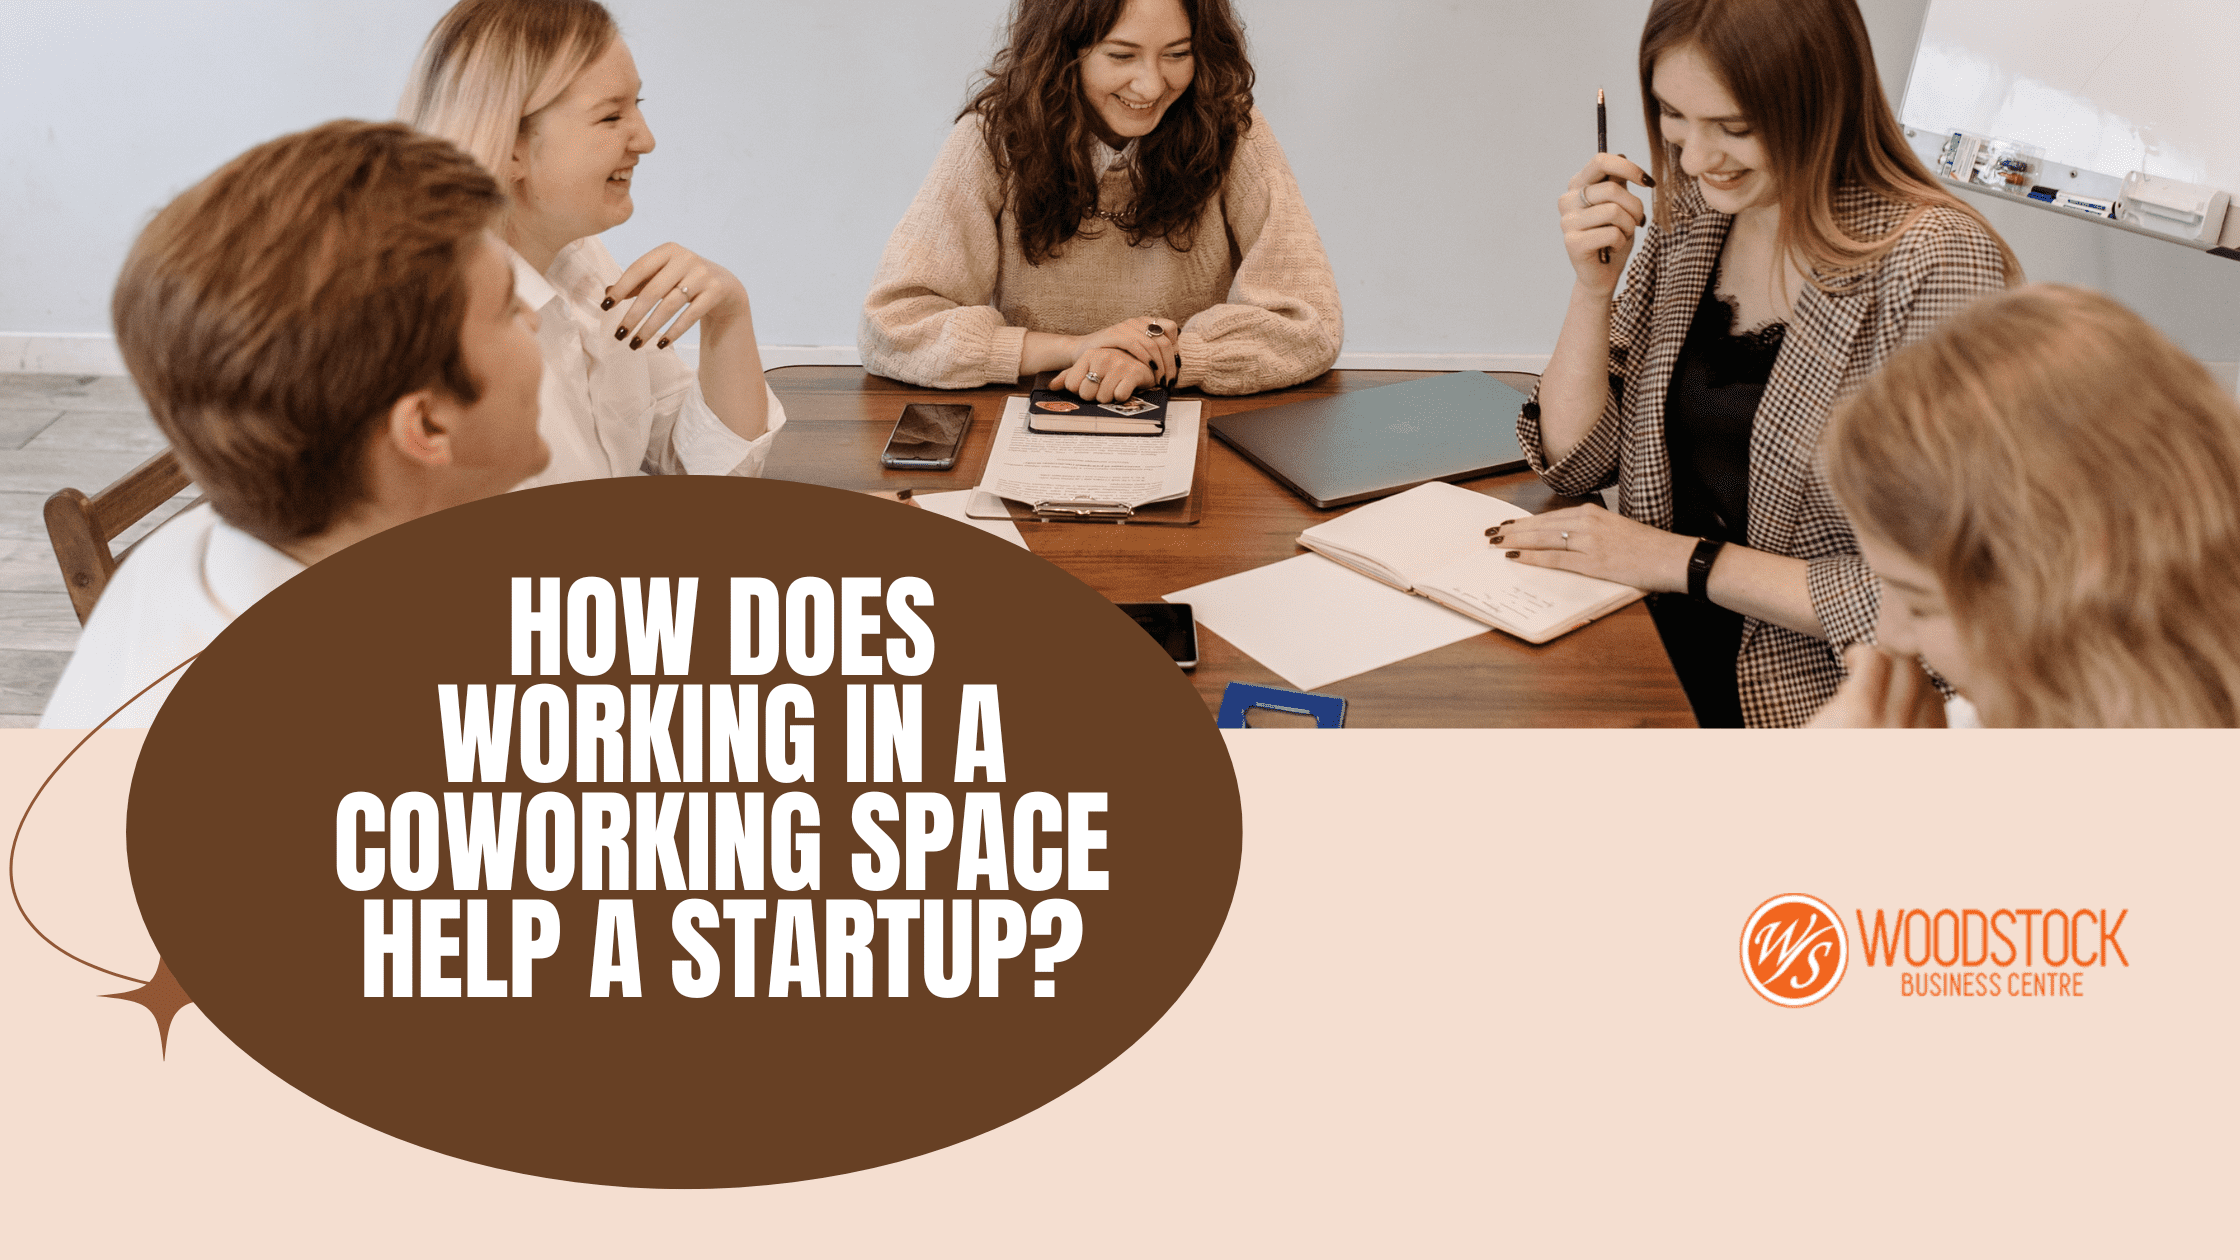 How does working in a coworking space help a startup?